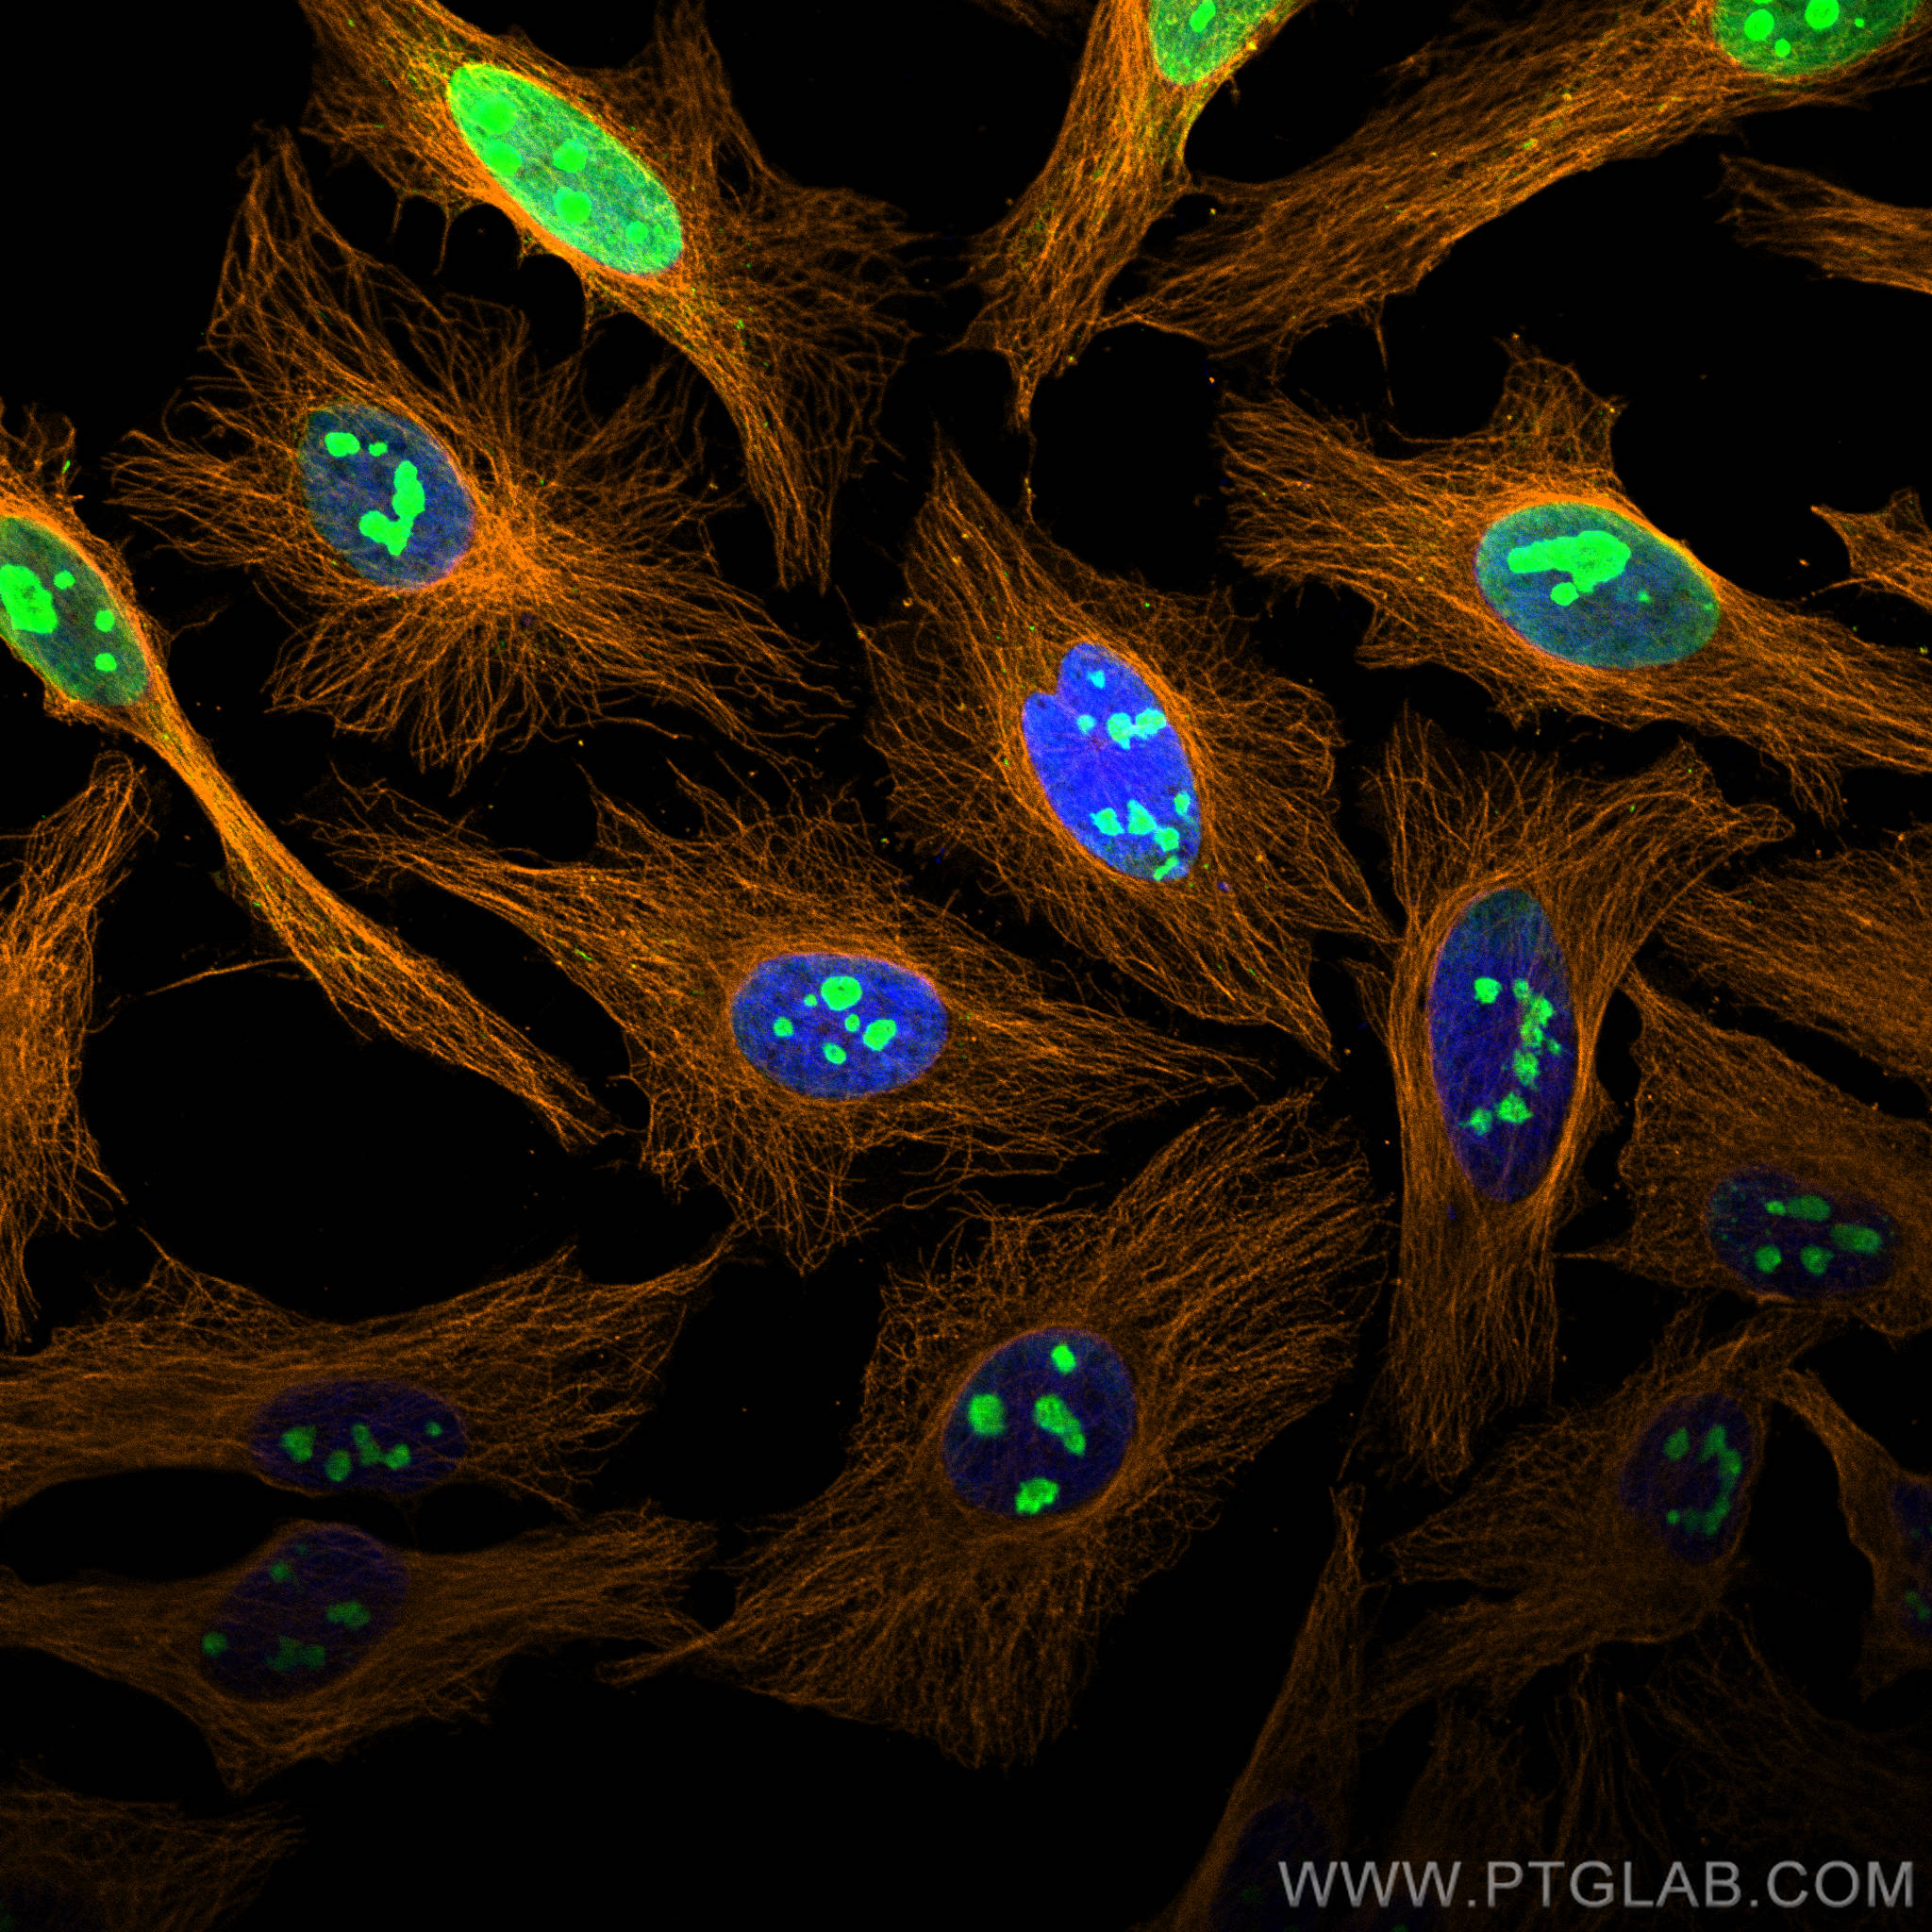 Immunofluorescence of Hela cells: Hela cells were fixed with 4% PFA and stained with Rabbit anti-Alpha Tubulin polyclonal antibody (11224-1-AP, 1:200, orange) and mouse anti-NPM1 monoclonal antibody (60096-1-Ig, 1:1000, green). Multi-rAb CoraLite® Plus 555-Goat Anti-Rabbit Recombinant Secondary Antibody (H+L) (RGAR003, 1:500) and Multi-rAbCoraLite® Plus 488-Goat Anti-Mouse Recombinant Secondary Antibody (H+L) (RGAM002, 1:500) were used for detection.